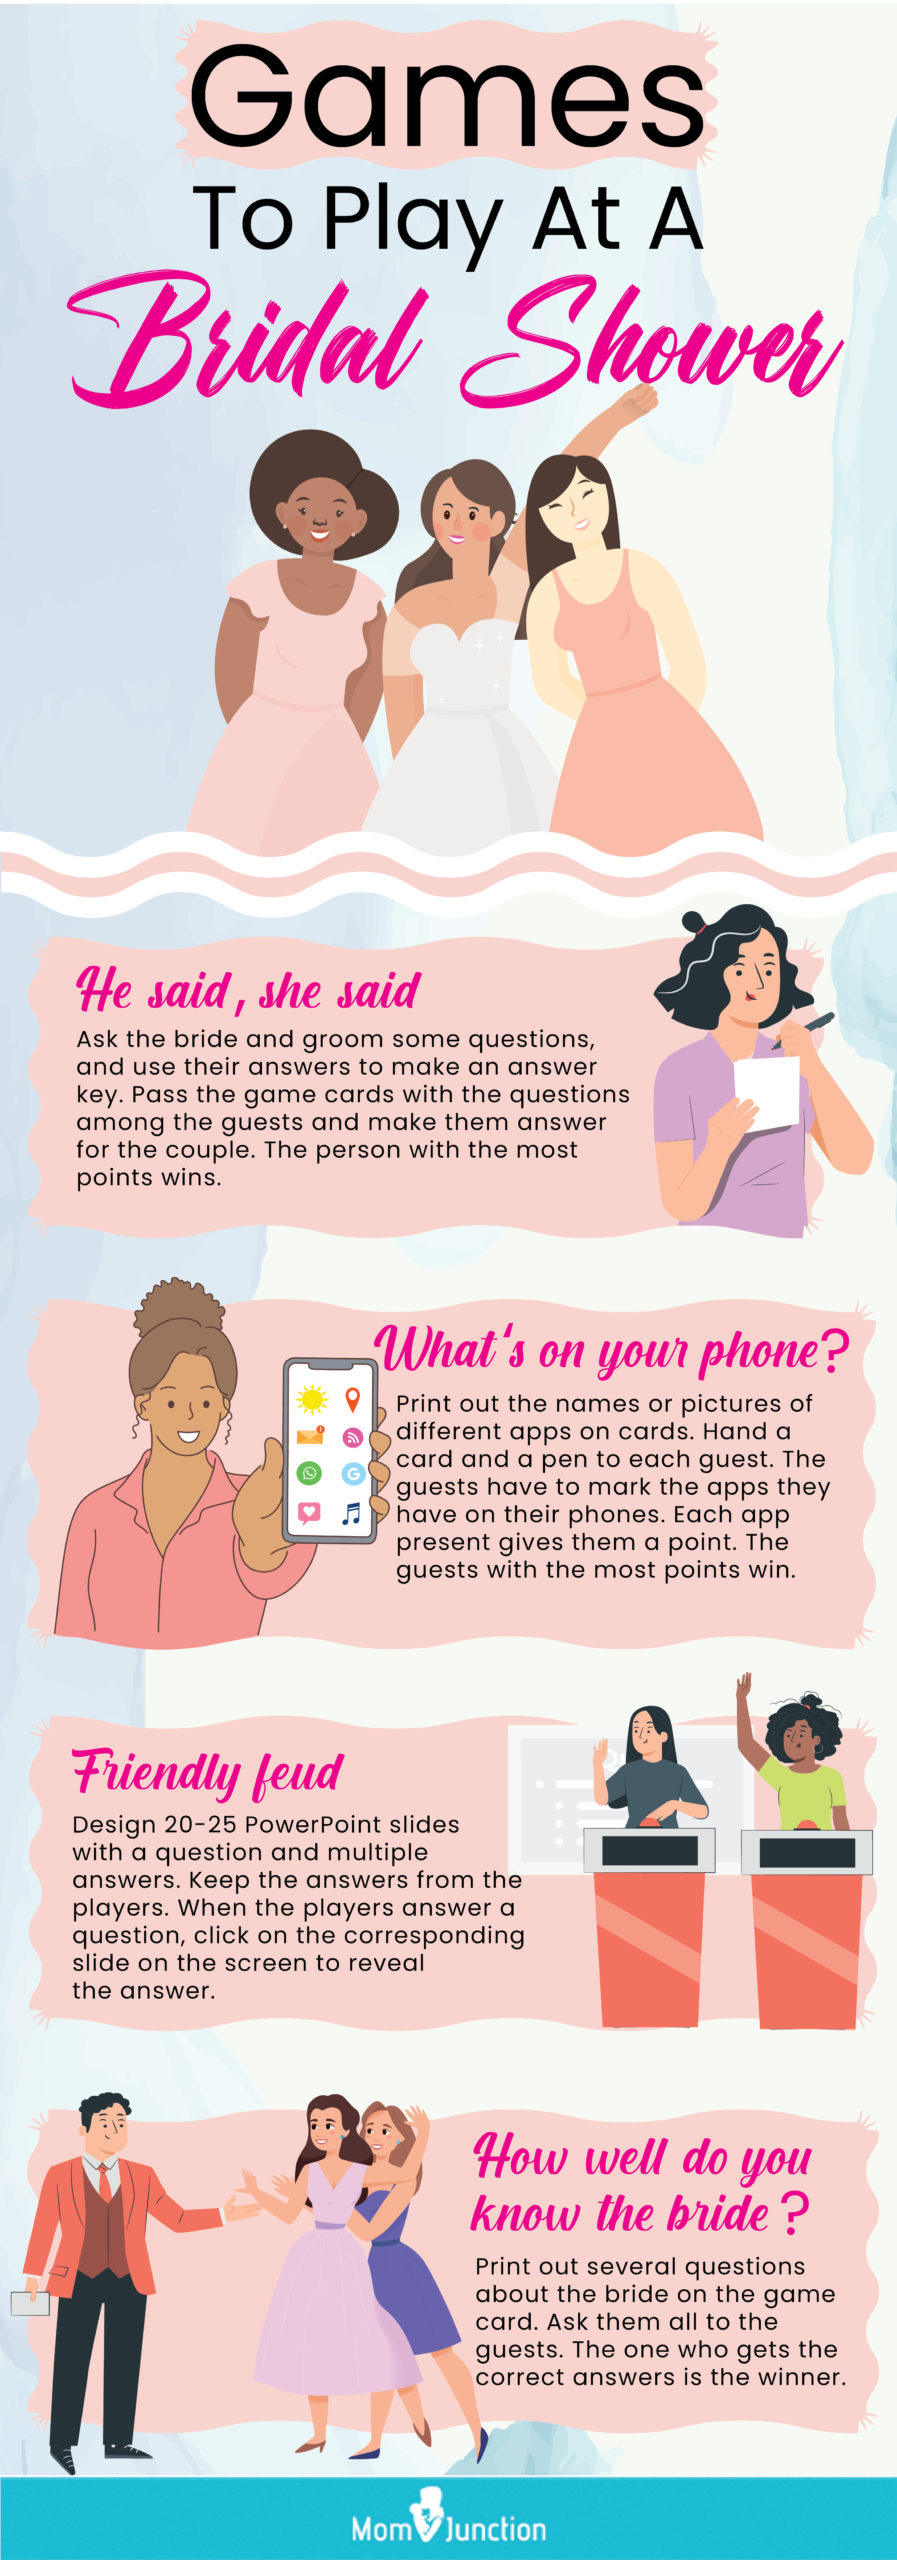 games to play at a bridal shower (infographic)